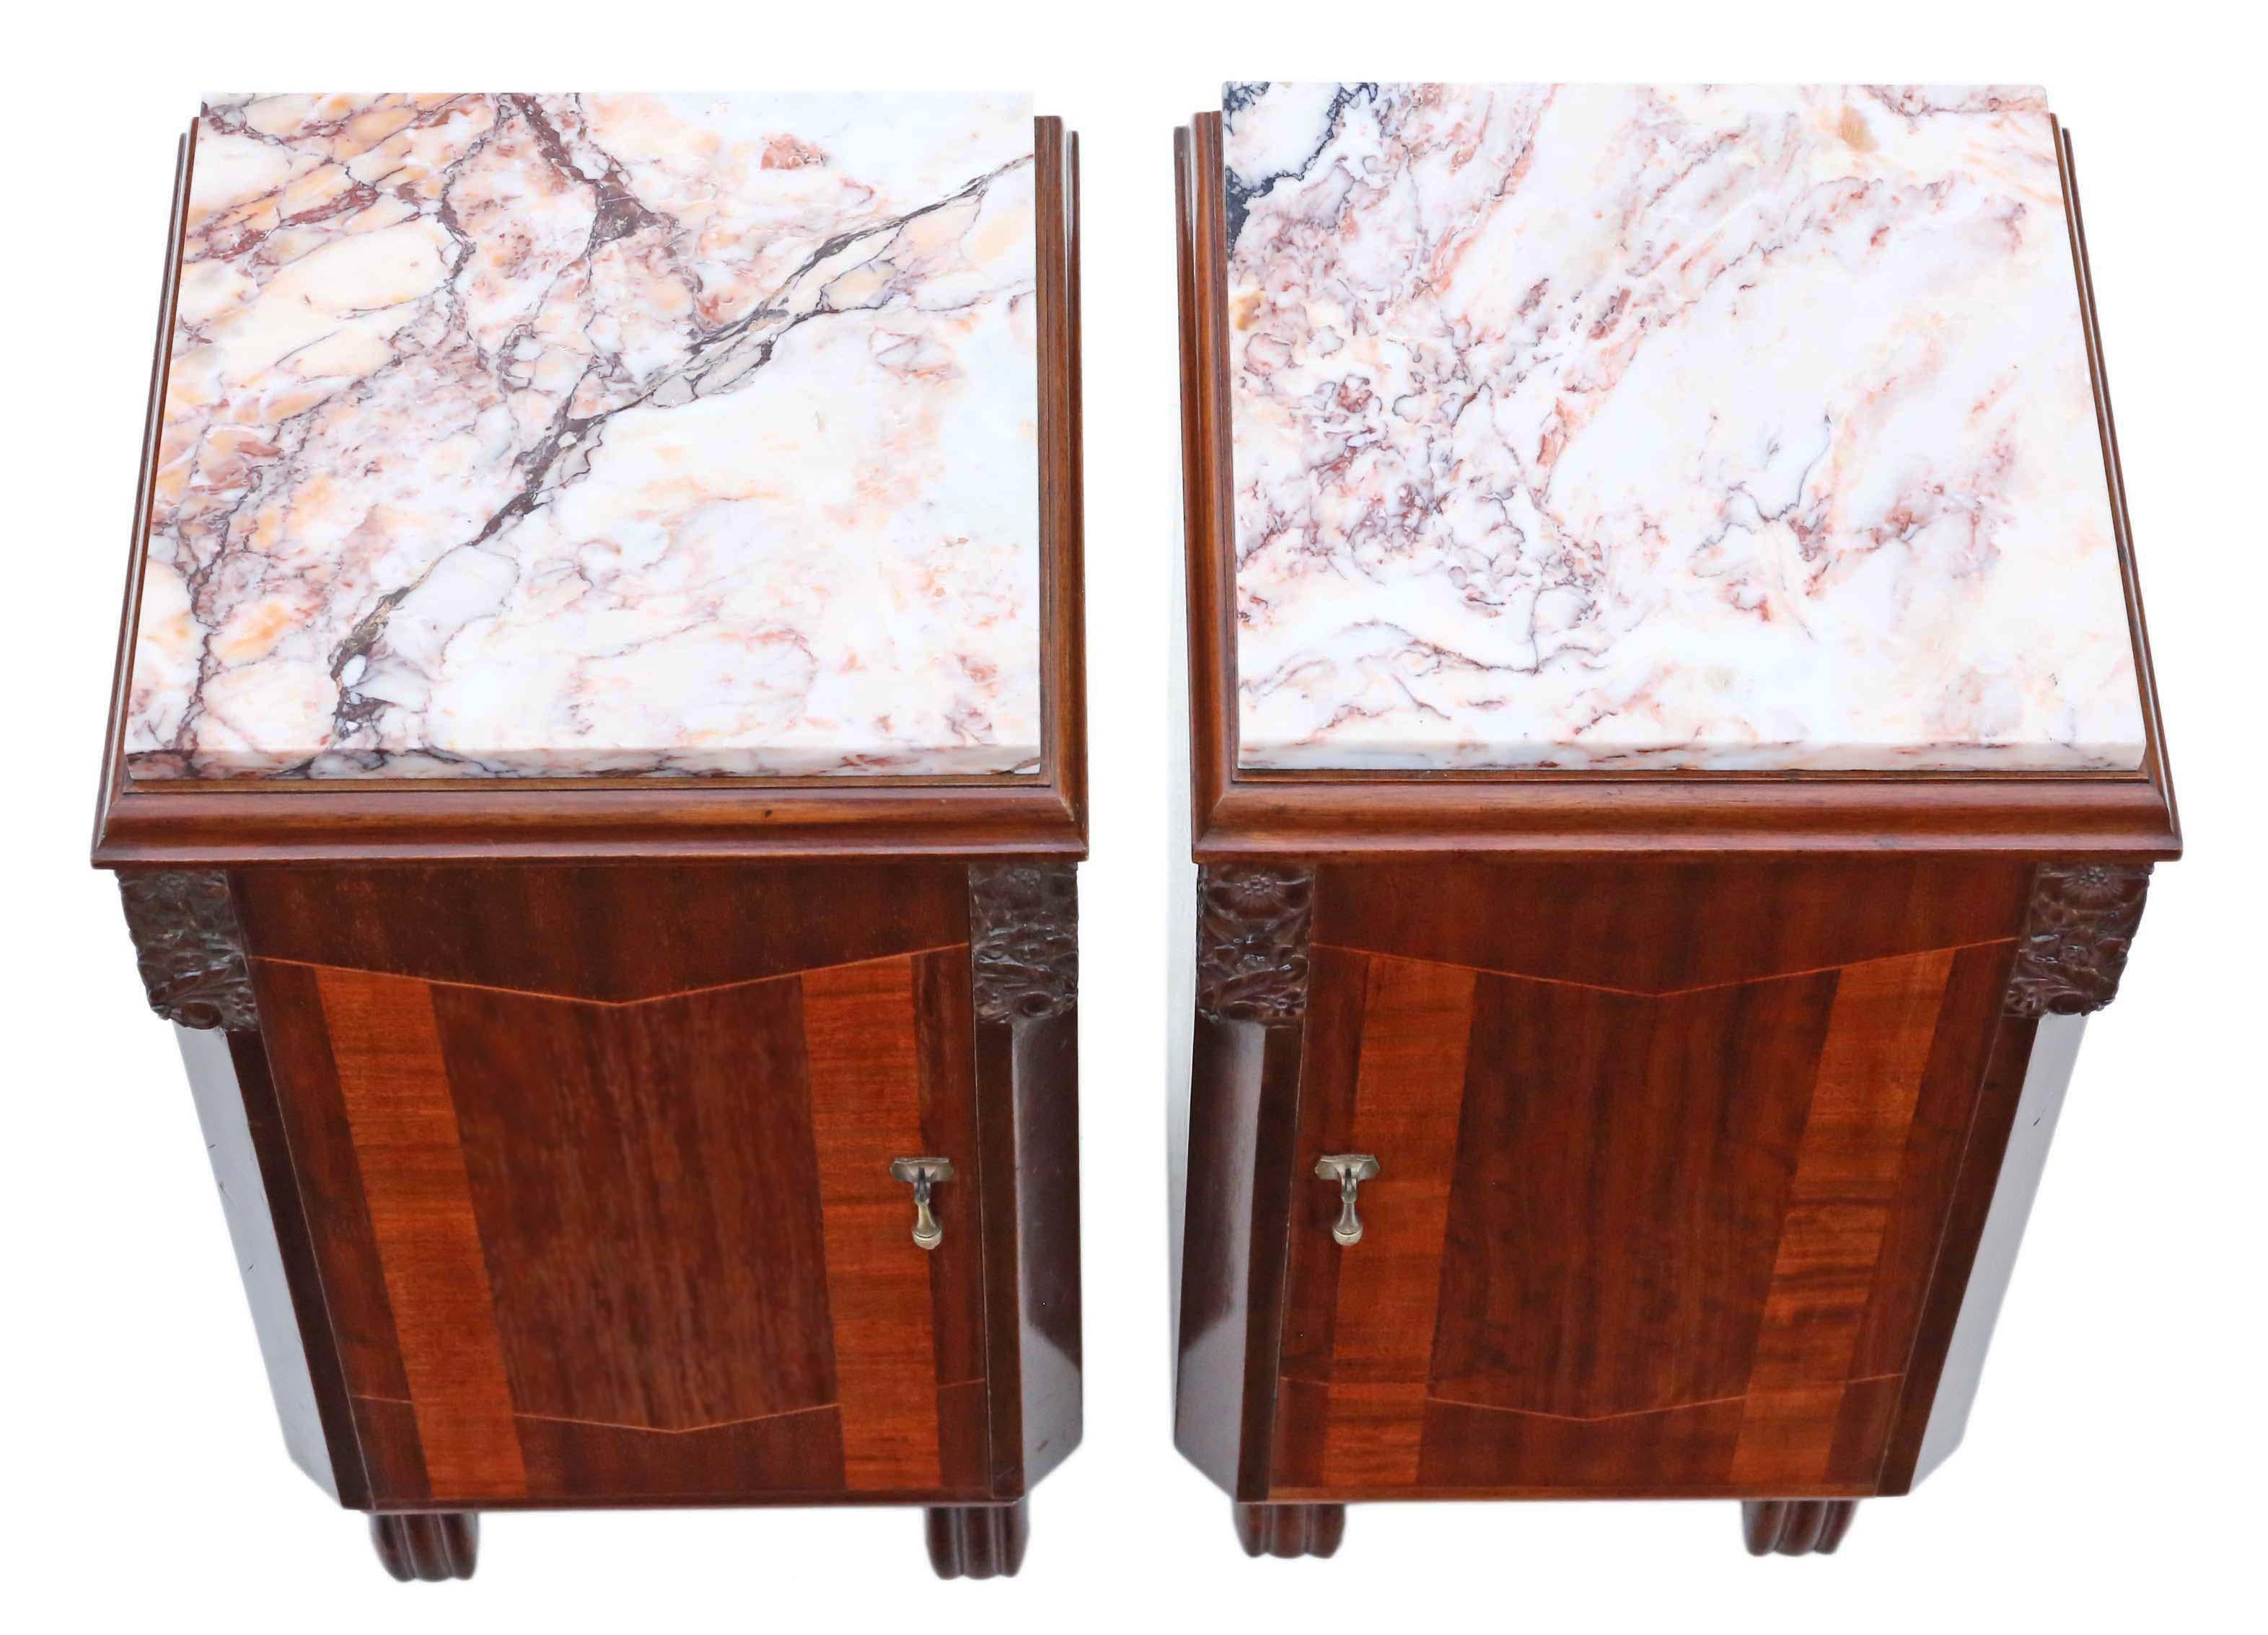 Antique fine quality pair of Art Deco marquetry bedside tables cupboards with marble tops, C1920-1930.

No loose joints and no woodworm. Working catches to the doors. Very heavy and strong.

Would look great in the right location! Attractive